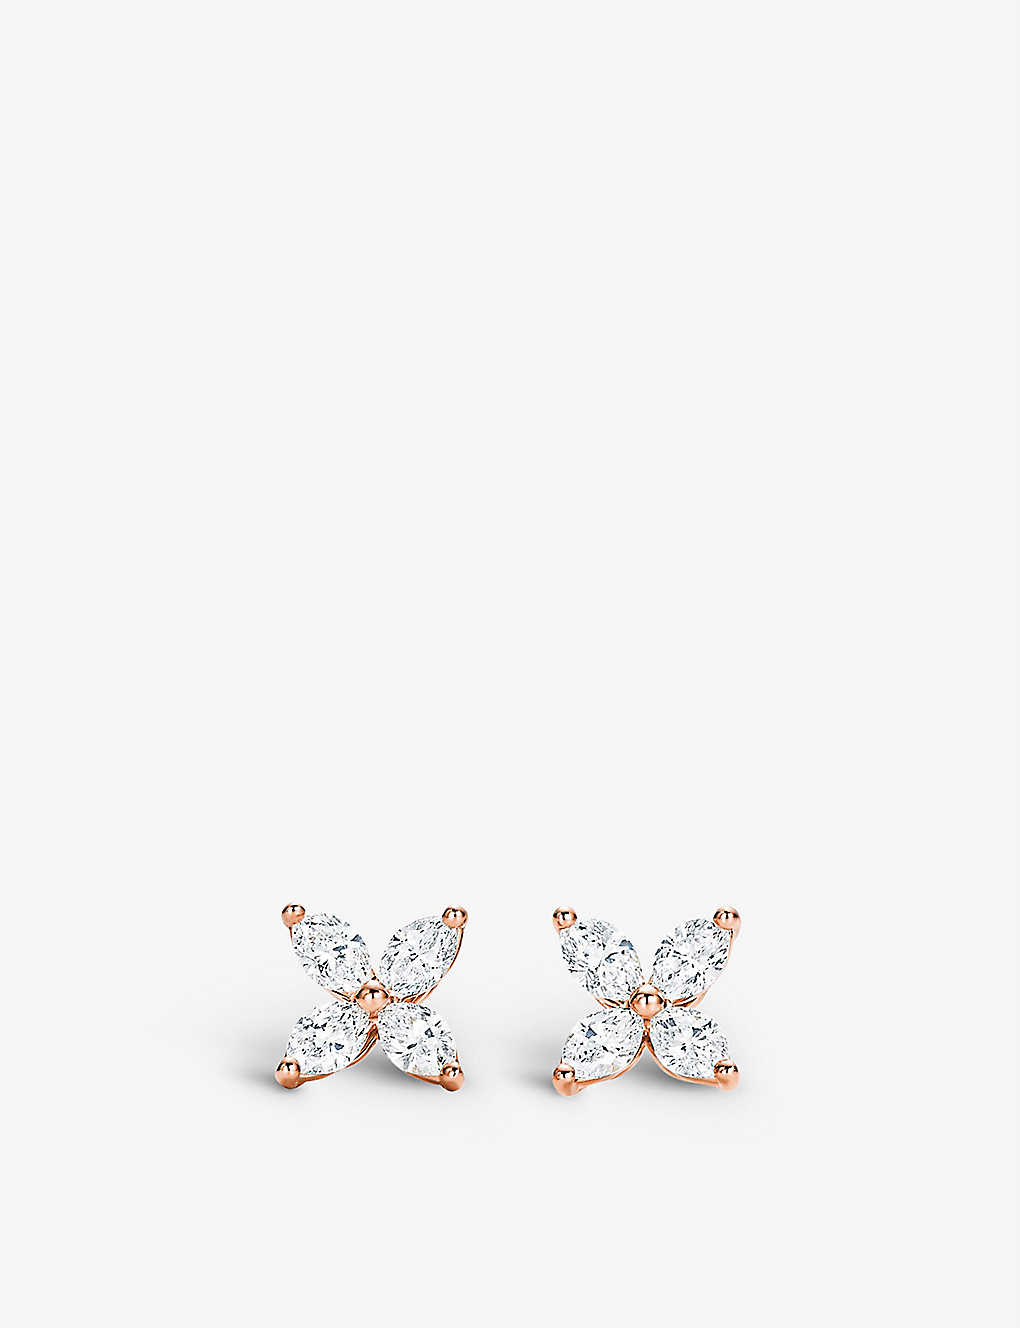 Tiffany & Co rose gold Victoria earrings with diamond